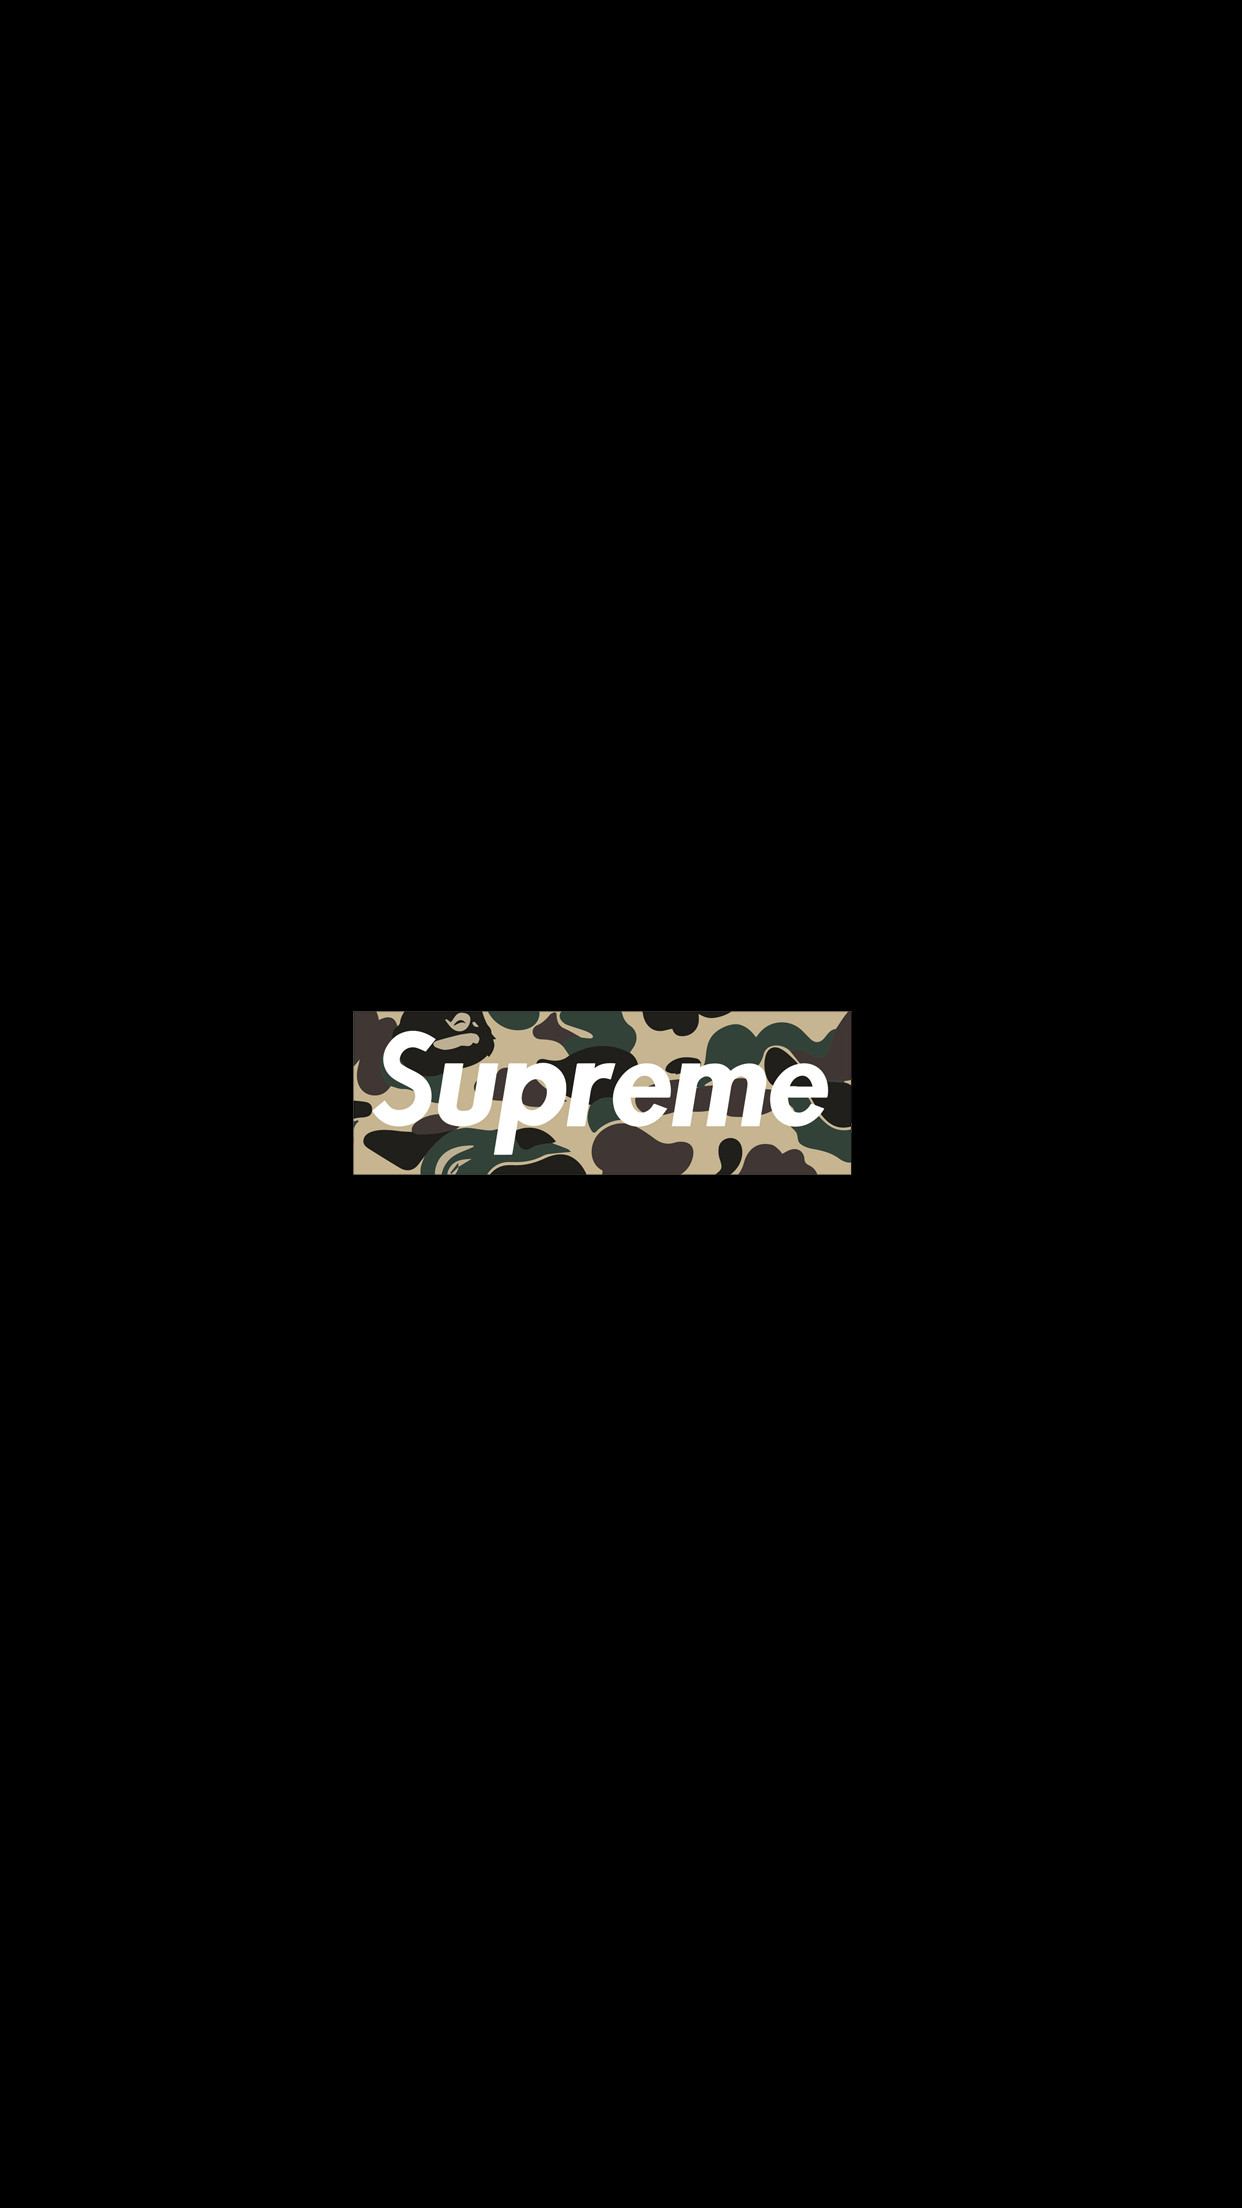 Supreme Wallpapers the best 79 images in 2018